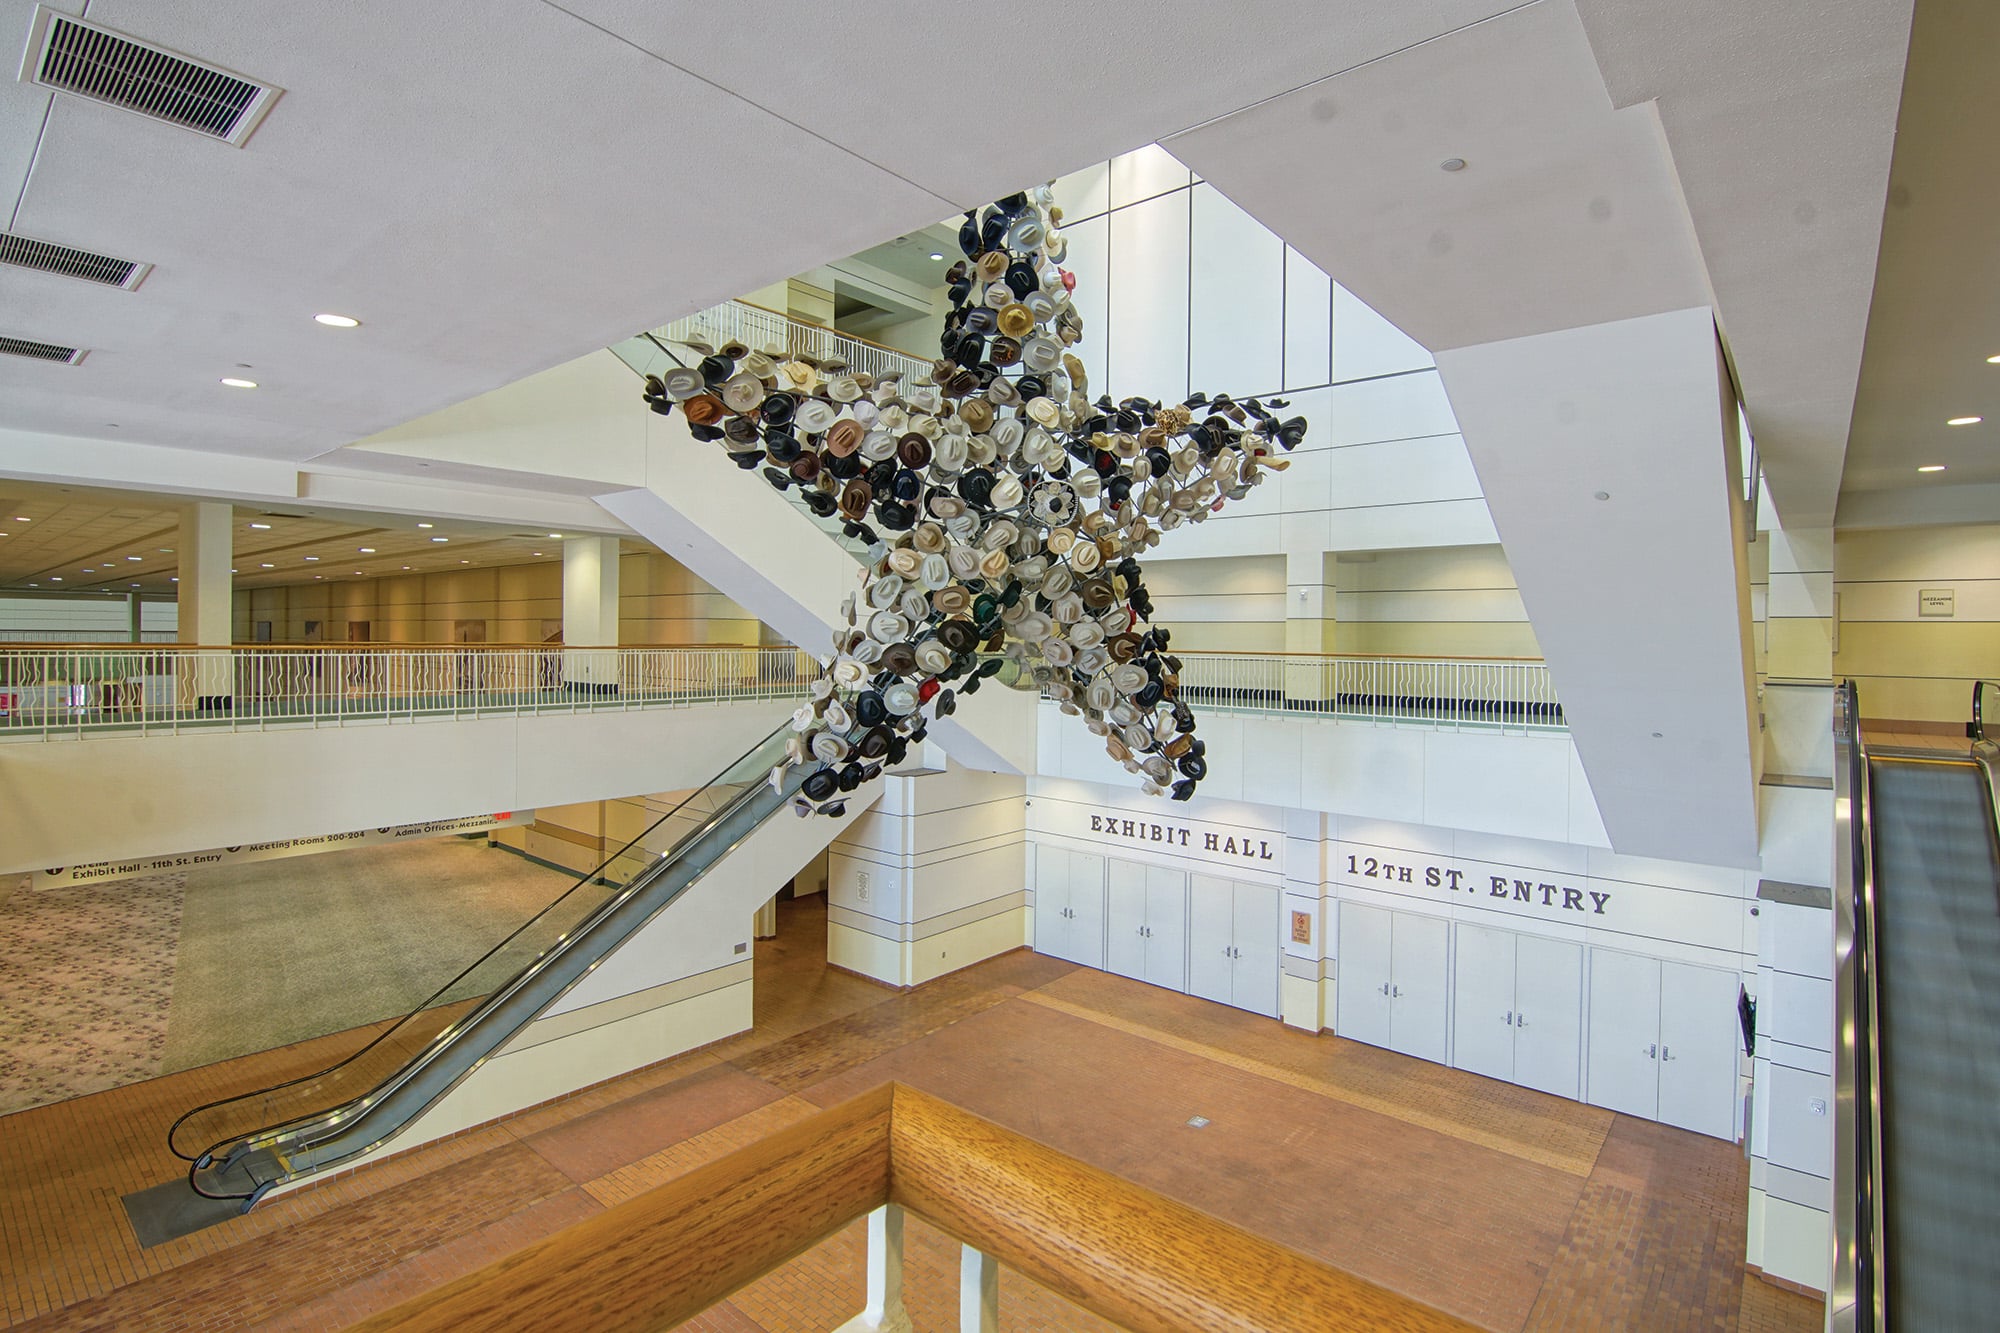 Wide shot of empty Fort Worth Convention Center featuring a large star made out of cowboy hats hanging in-between staircases.